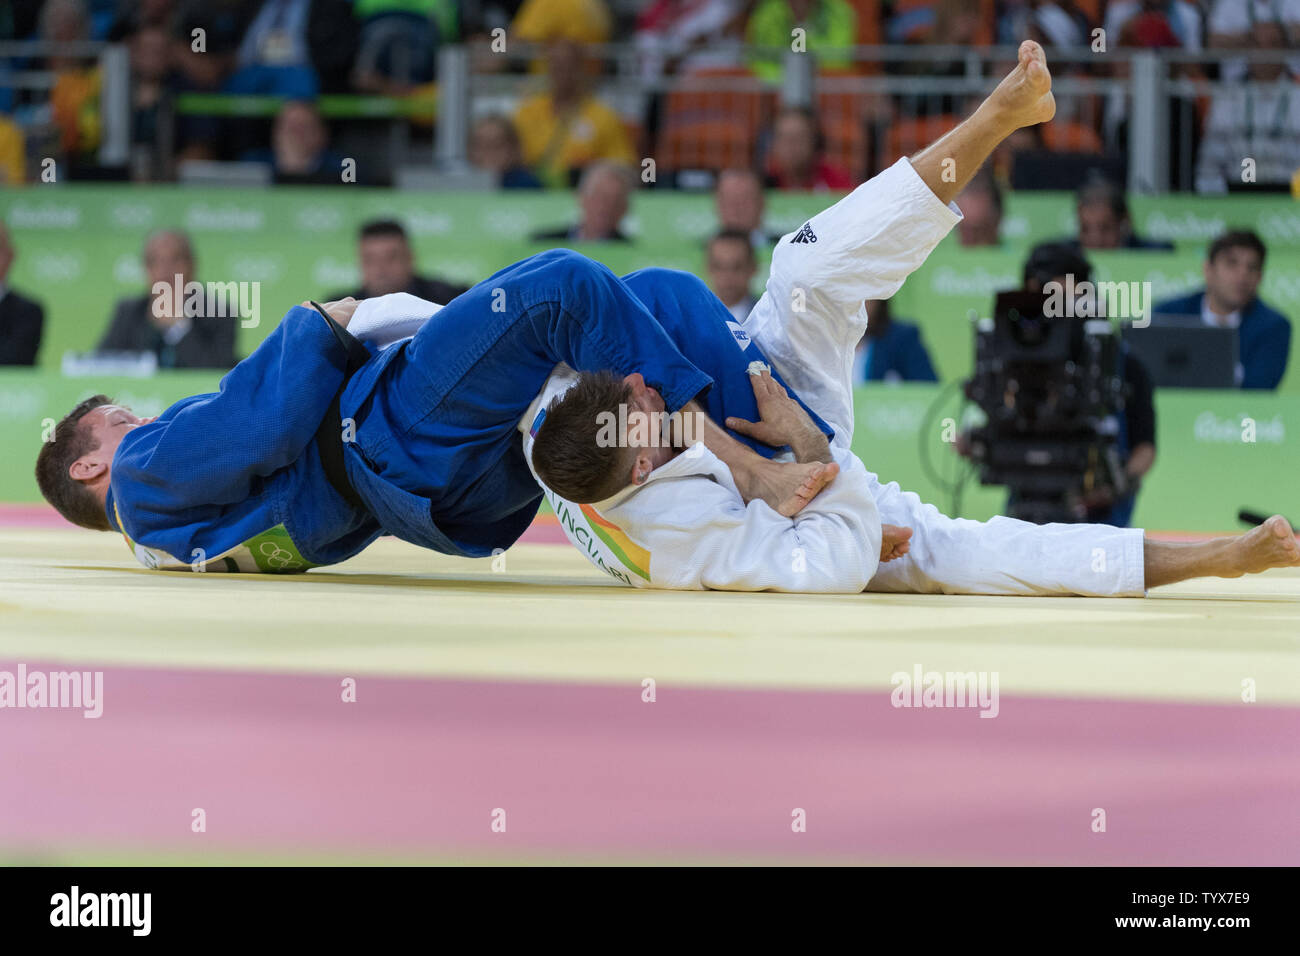 Dirk Van Tichelt of Belgium in blue during the Men's 73kg Judo bronze medal match  at Carioca Arena 2 in Rio de Janeiro, Brazil, August 8, 2016. Van Tichelt won the bronze medal and was later mugged celebrating on Copacabana Beach.     Photo by Richard Ellis/UPI.. Stock Photo